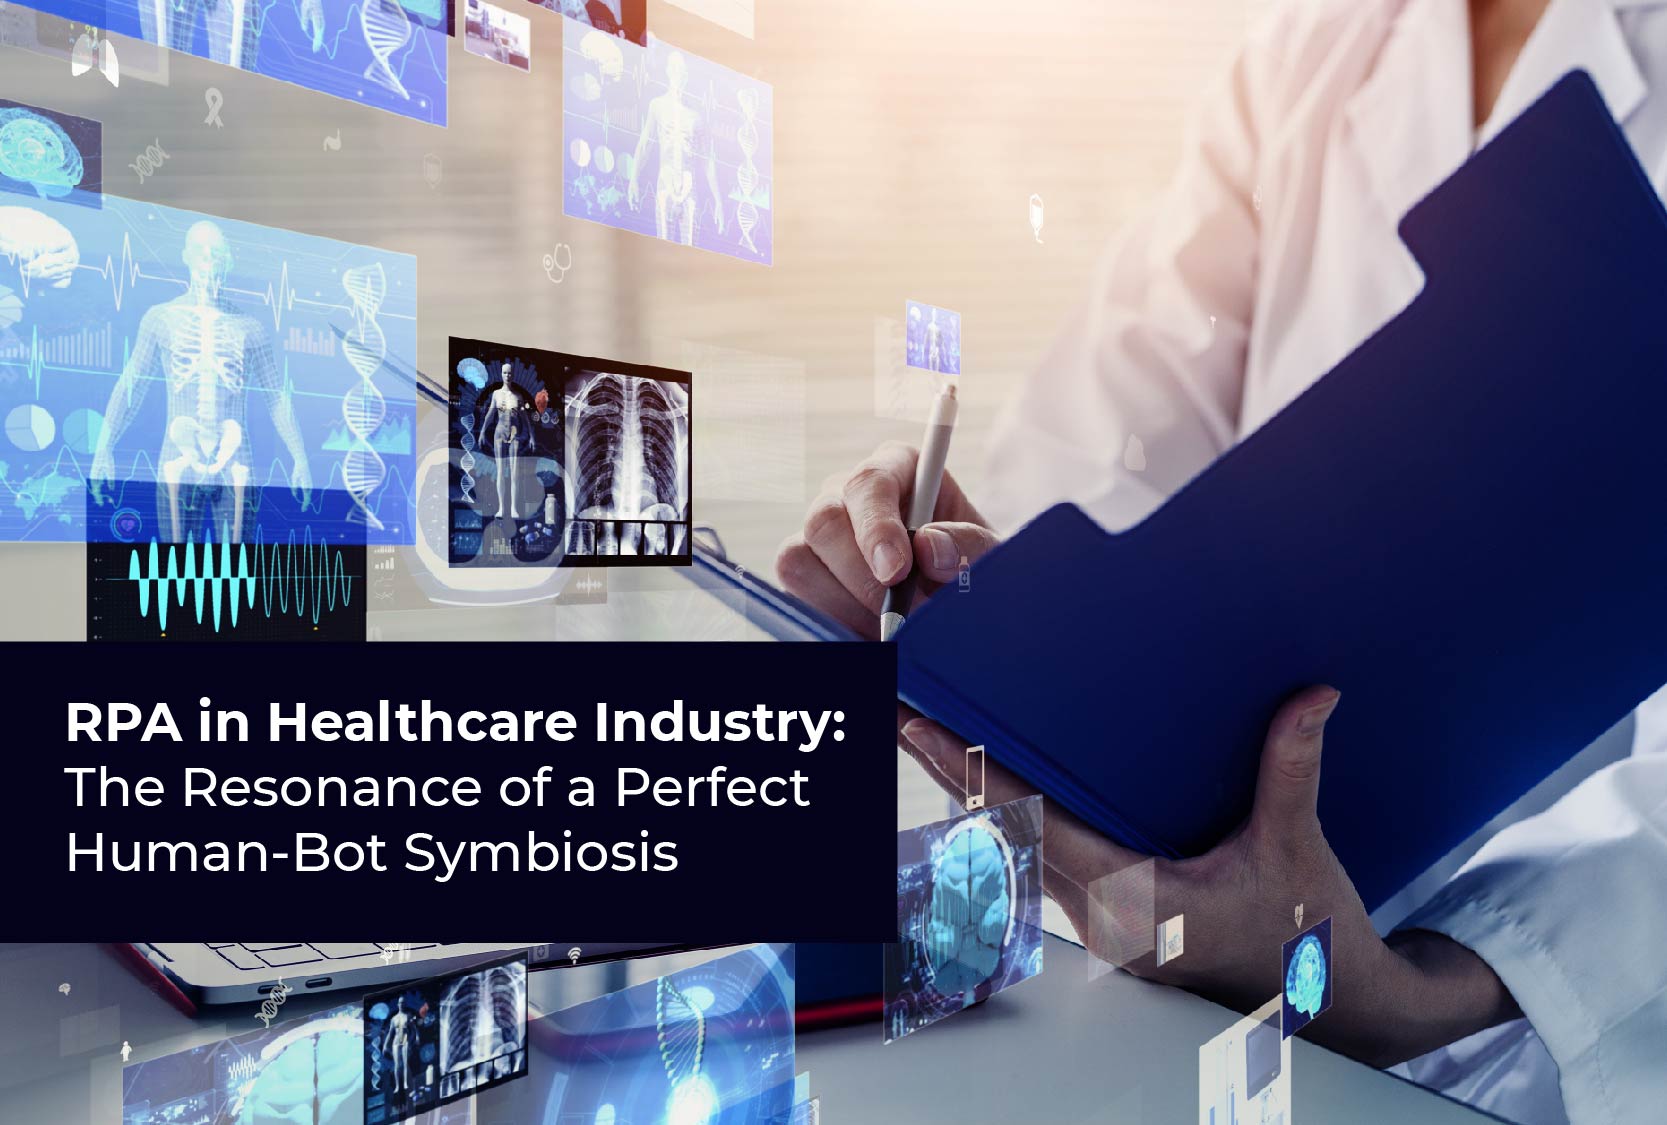 RPA in Healthcare Industry: The Resonance of a Perfect Human-Bot Symbiosis